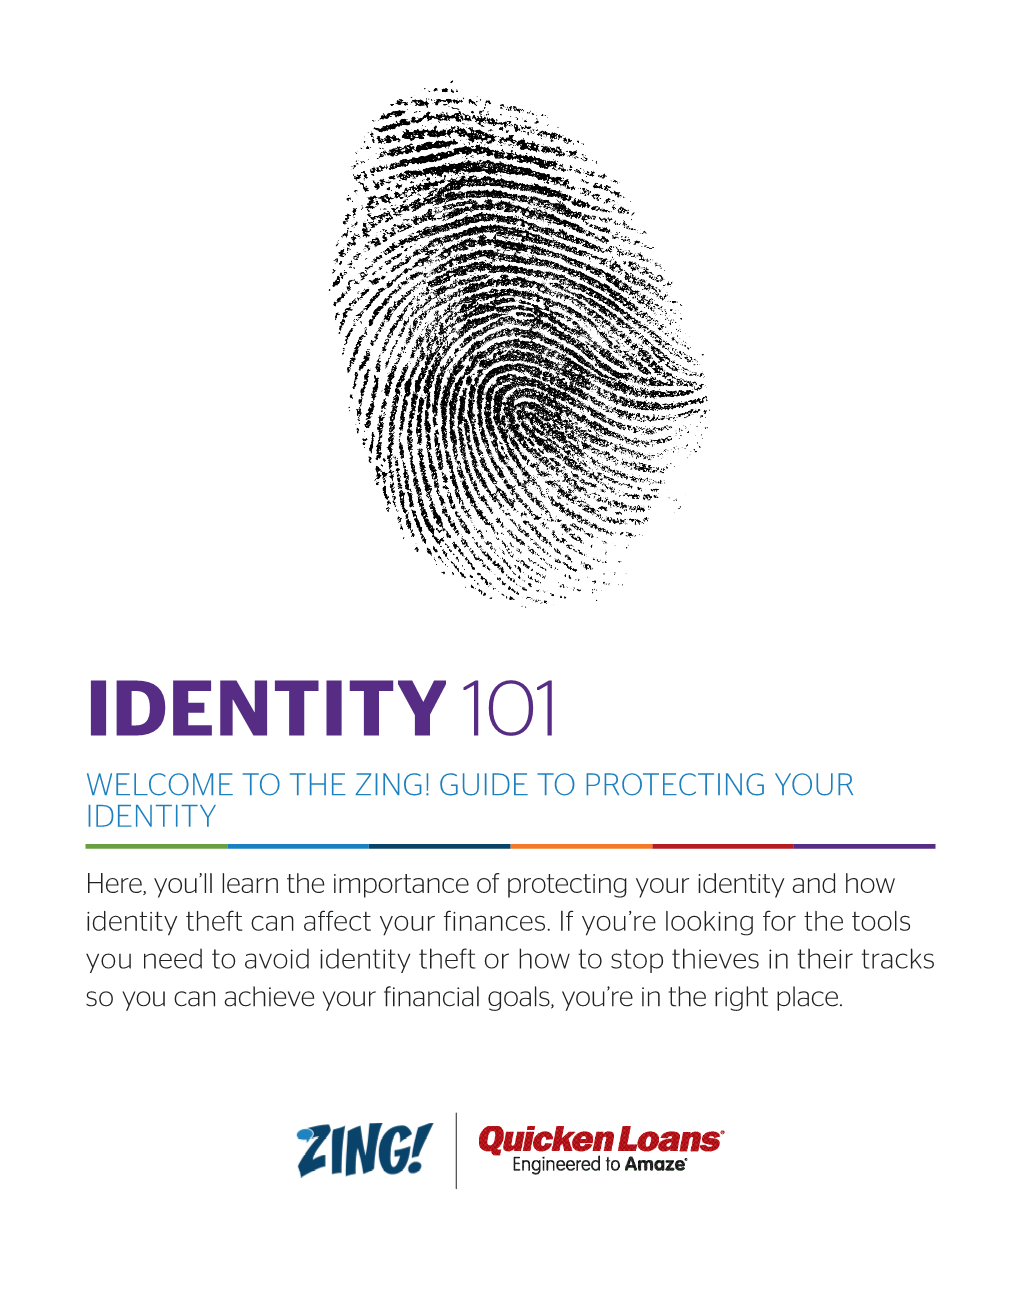 Identity 101 Welcome to the Zing! Guide to Protecting Your Identity